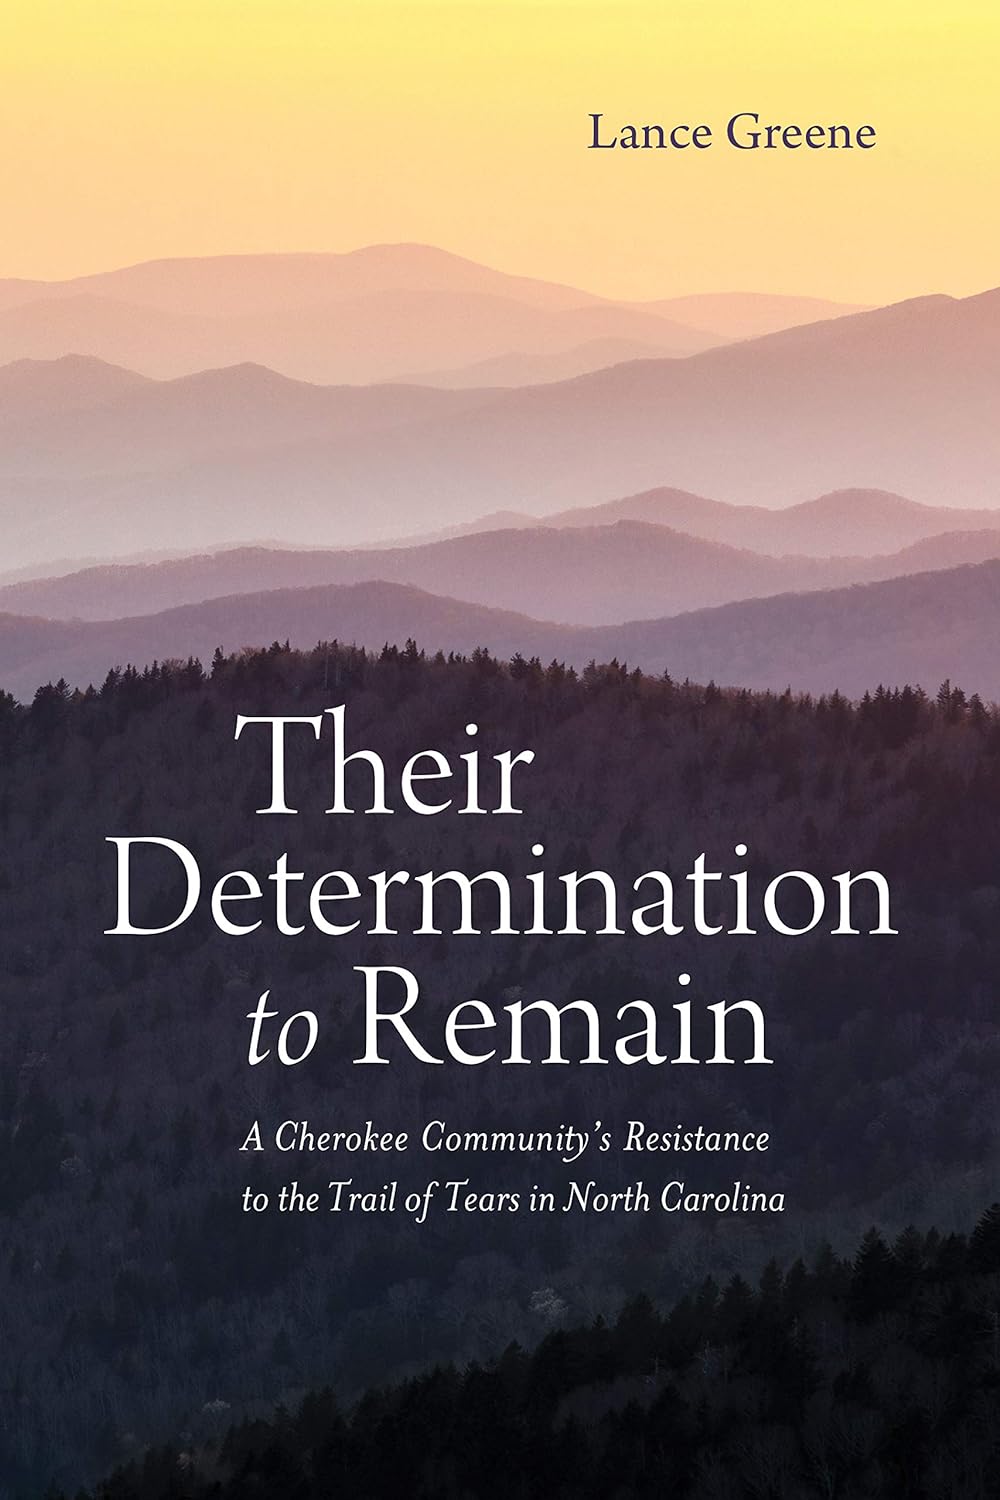 Their Determination to Remain: A Cherokee Community's Resistance to the Trail of Tears in North Carolina by Lance Greene